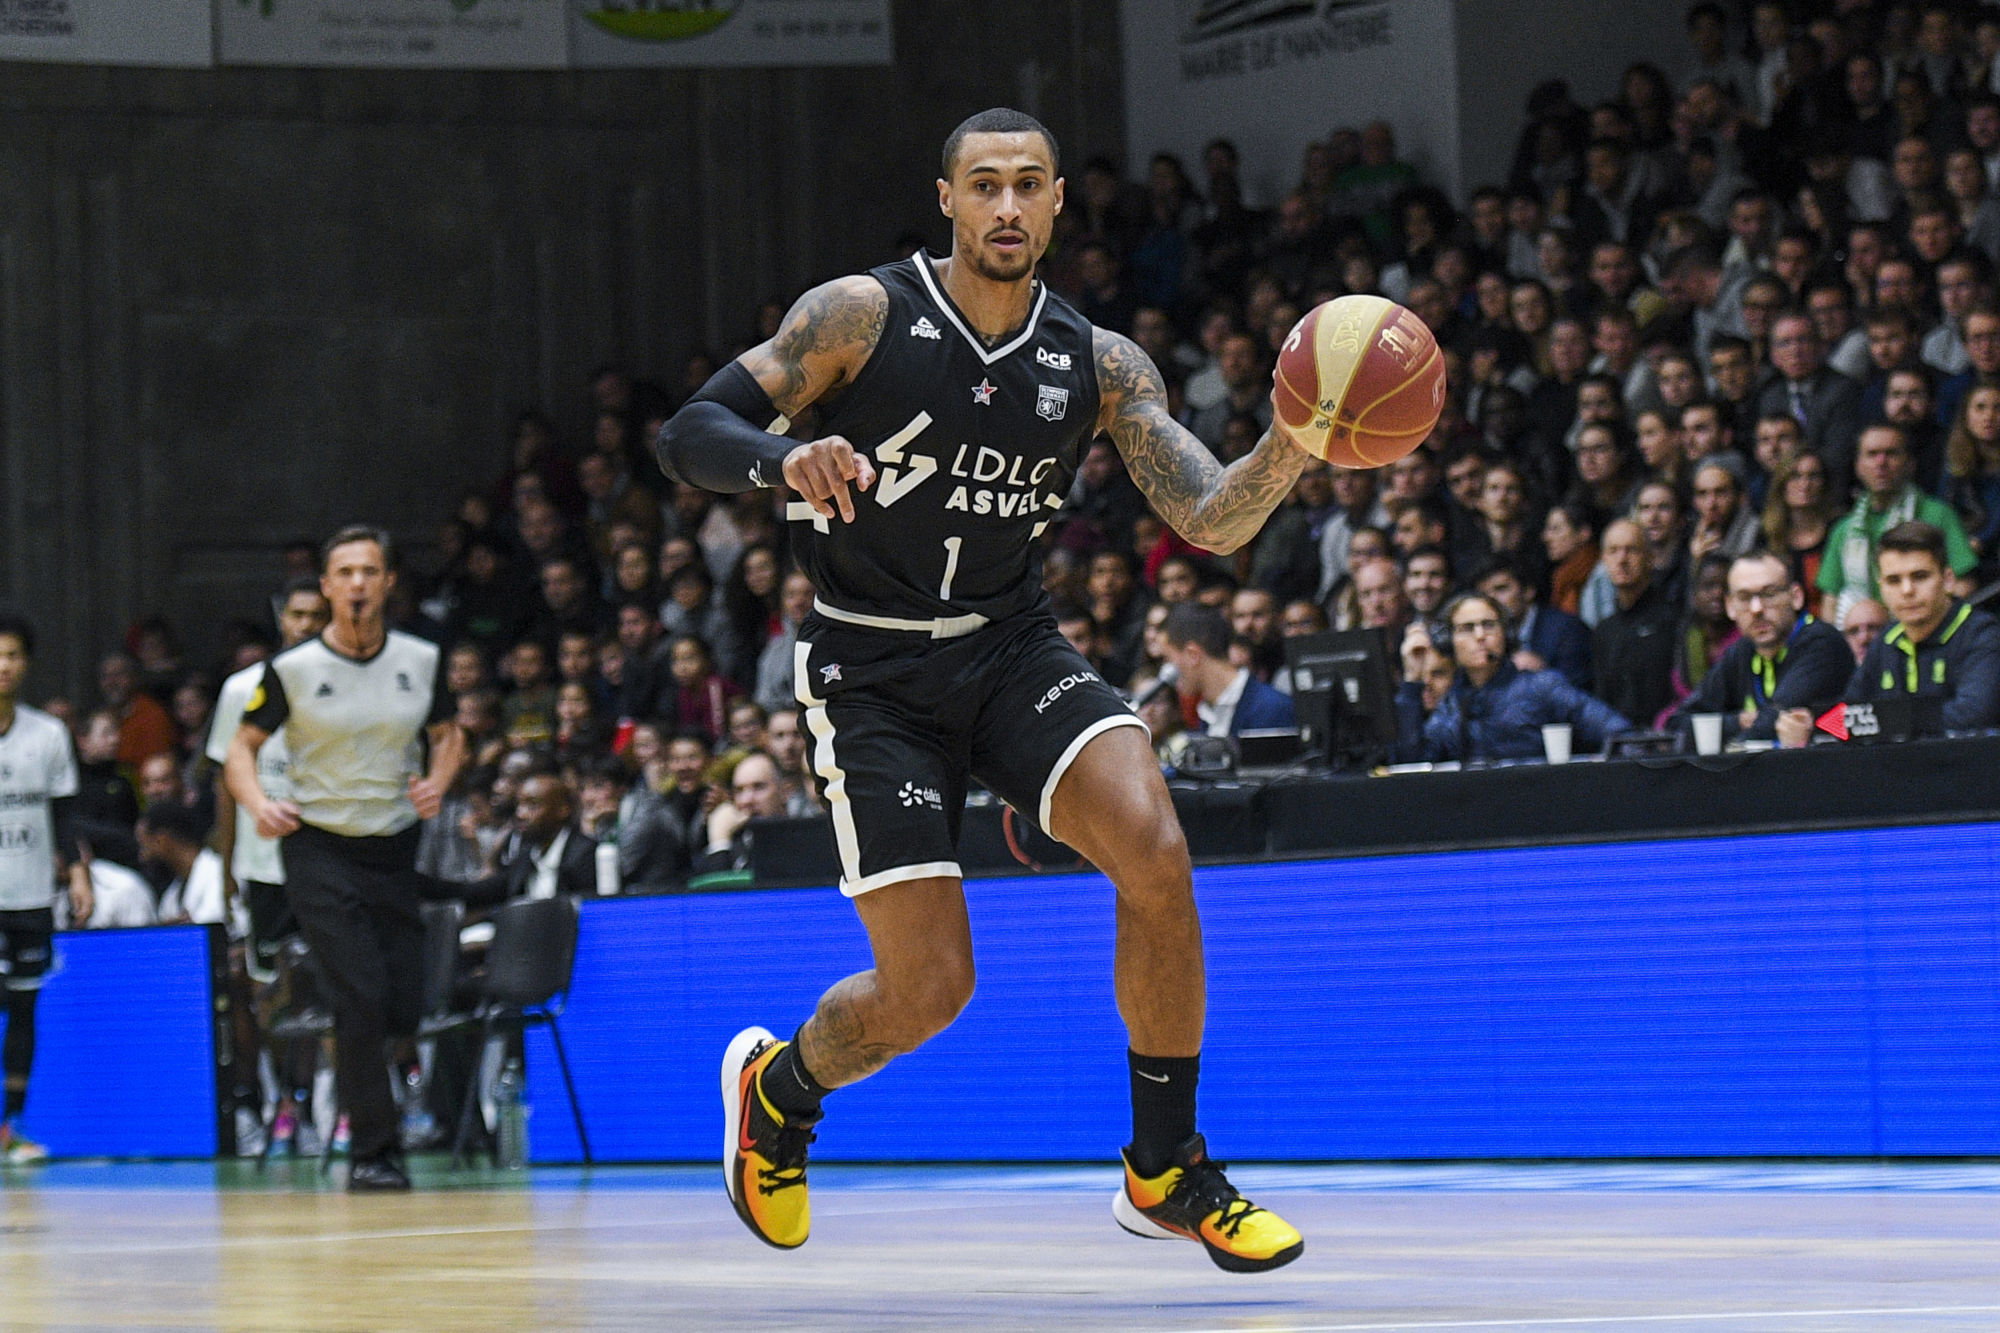 Edwin JACKSON of Asvel during the Jeep Elite match between Nanterre 92 and ASVEL on December 4, 2019 in Nanterre, France. (Photo by Aude Alcover/Icon Sport) - Edwin JACKSON - Palais des Sports Maurice Thorez - Nanterre (France)